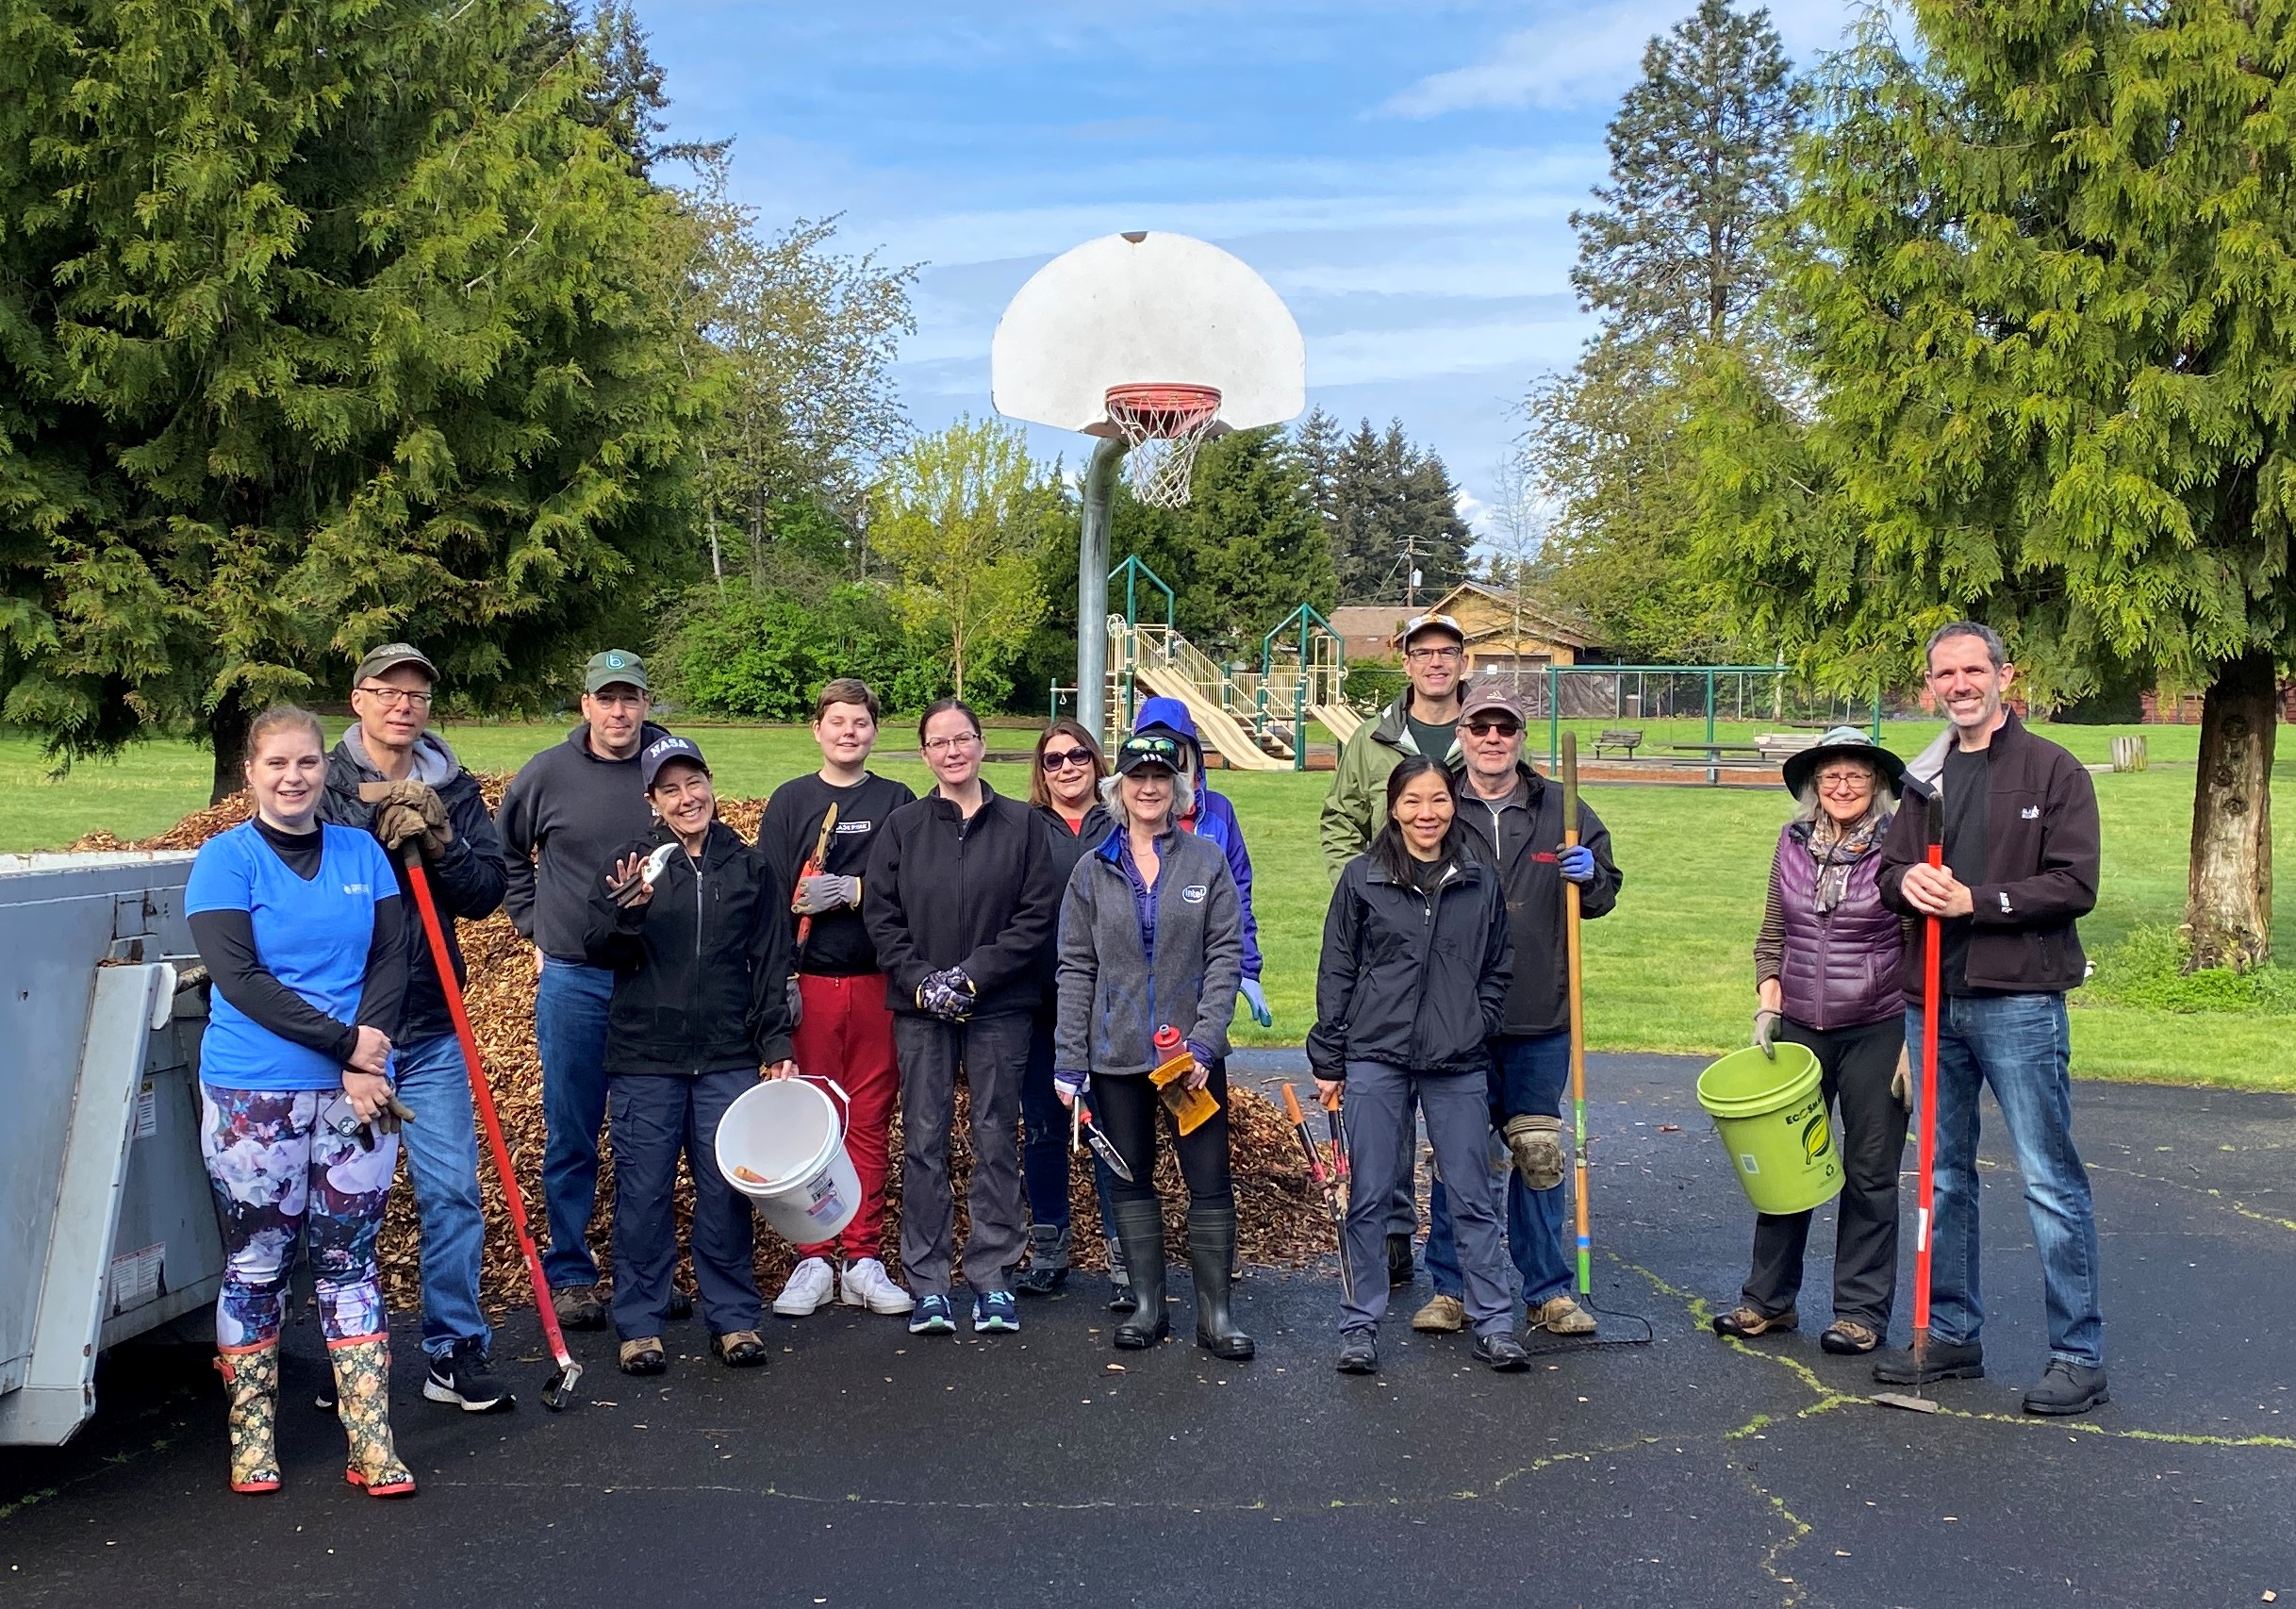 group of volunteers poses holding tools near a dropbox on a basketball court in a park